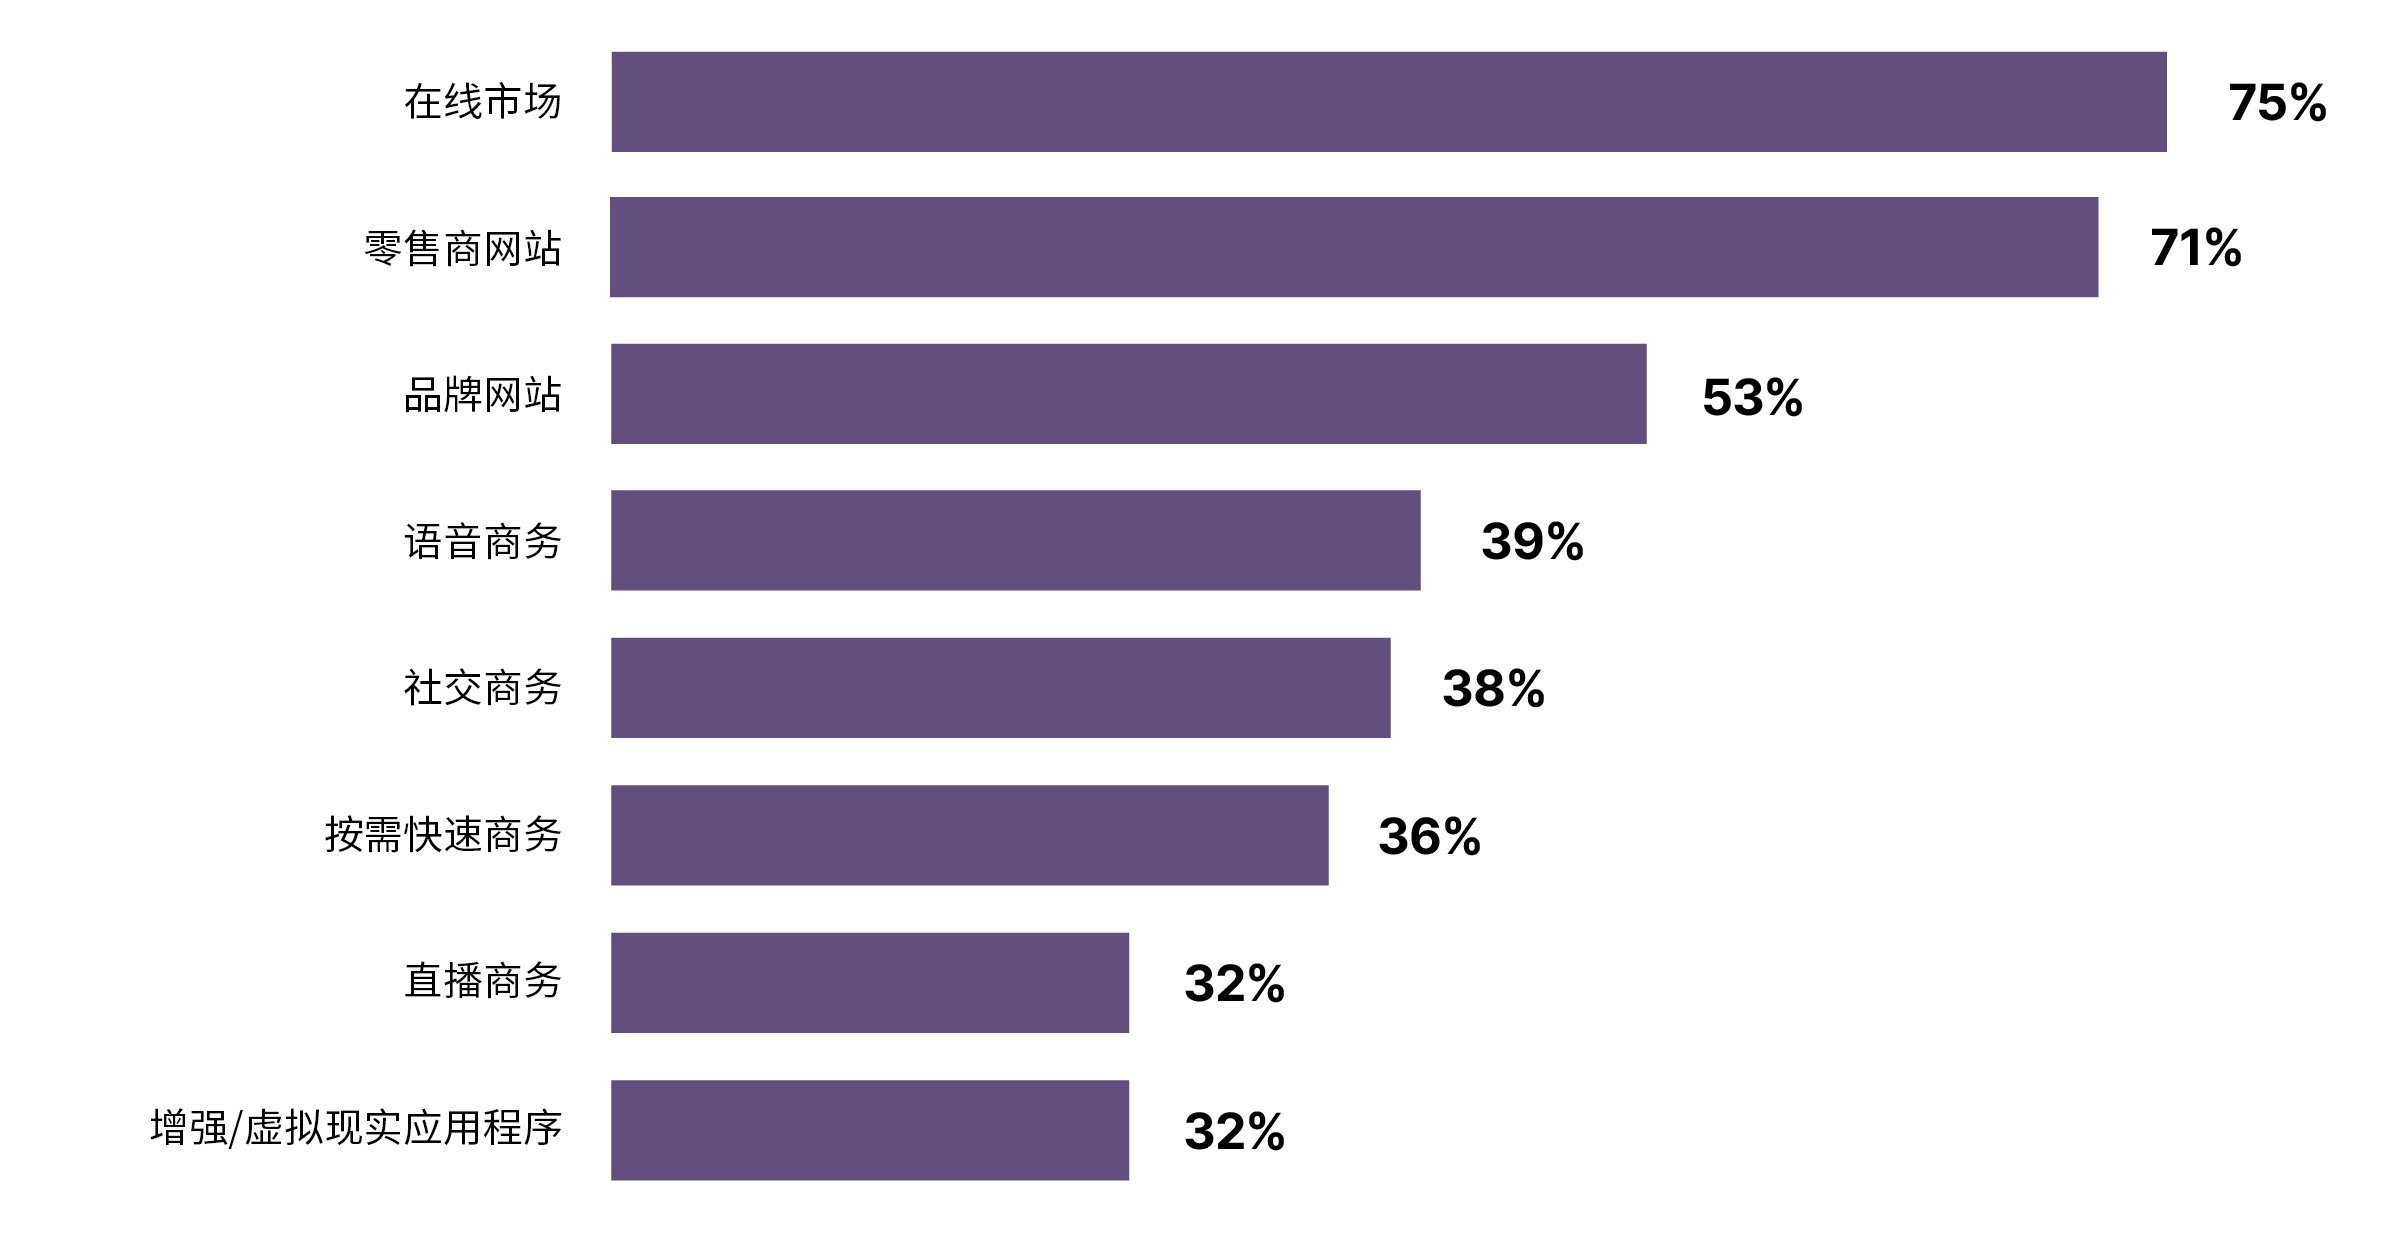 Bar chart showing that consumers are engaging in a variety of shopping mediums: 75% using online marketplaces, 71% retailer websites, 53% brand websites, 39% voice commerce, 38% social commerce, 36% on-demand commerce, 32% livestream commerce and 32% AR/VR apps.